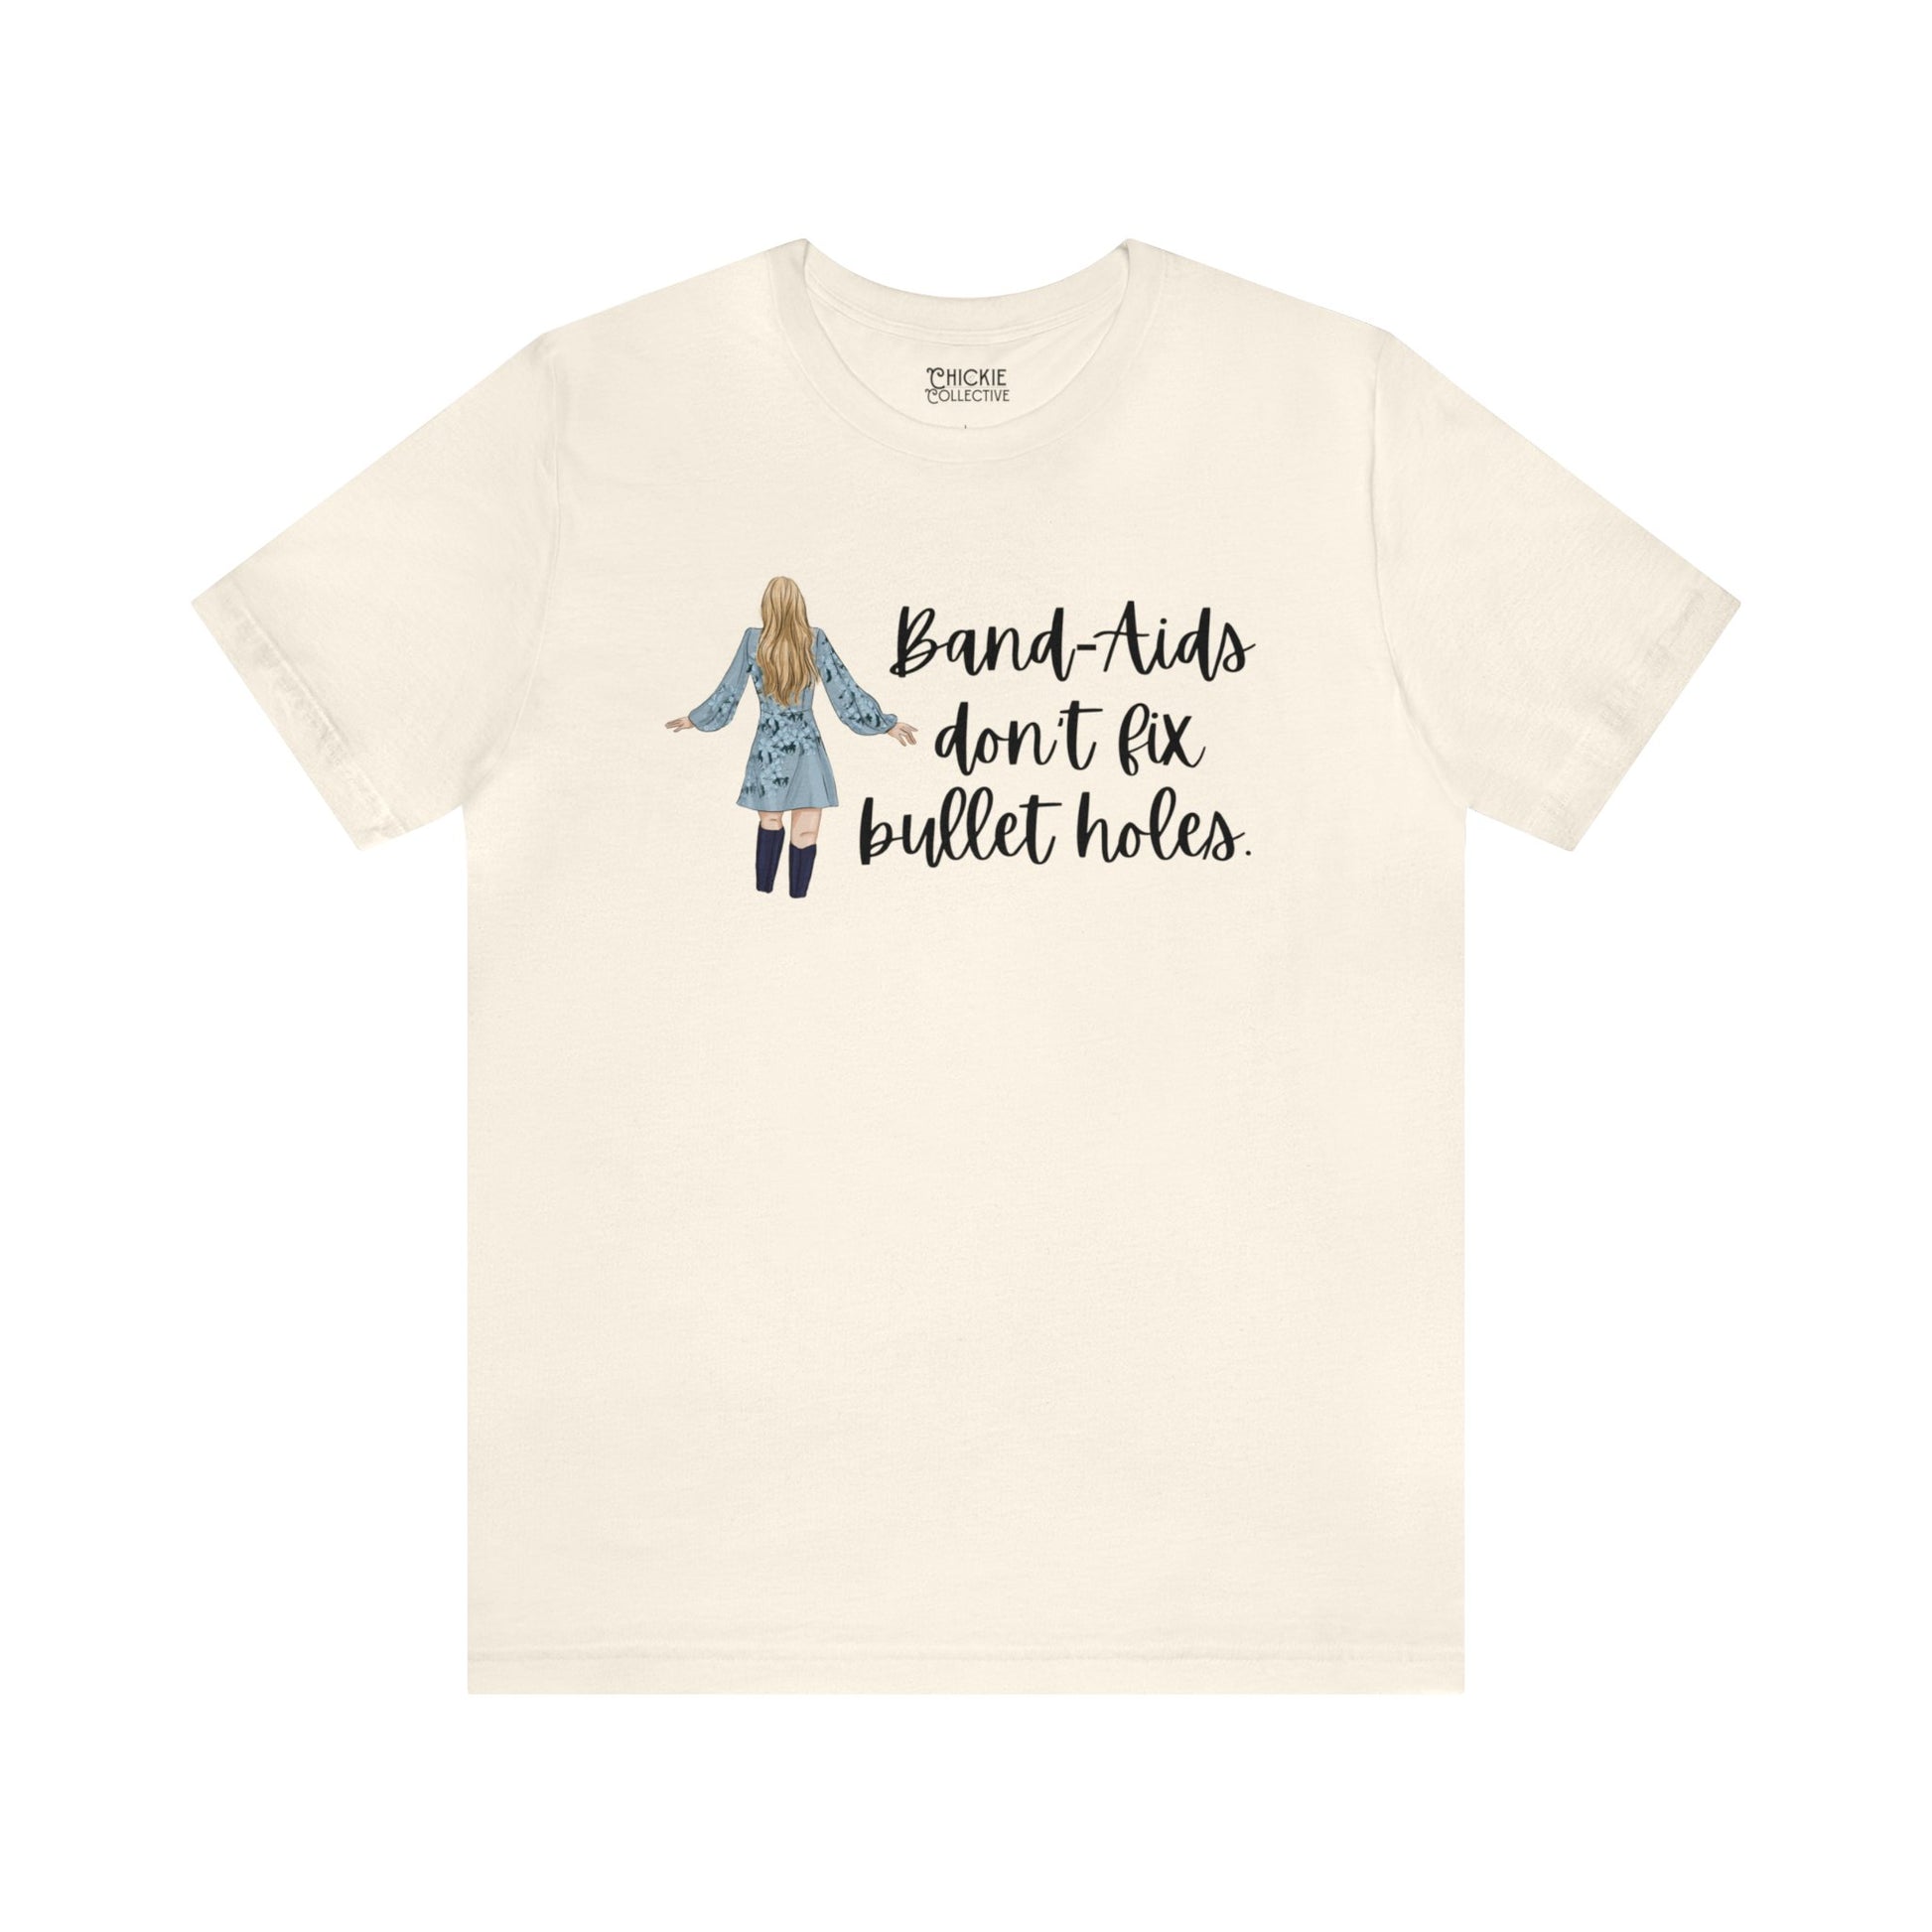 Taylor Swift Preppy Picture T-Shirt - Bandaids Don't Fix Bullet holes T-Shirt Natural S  - Chickie Collective